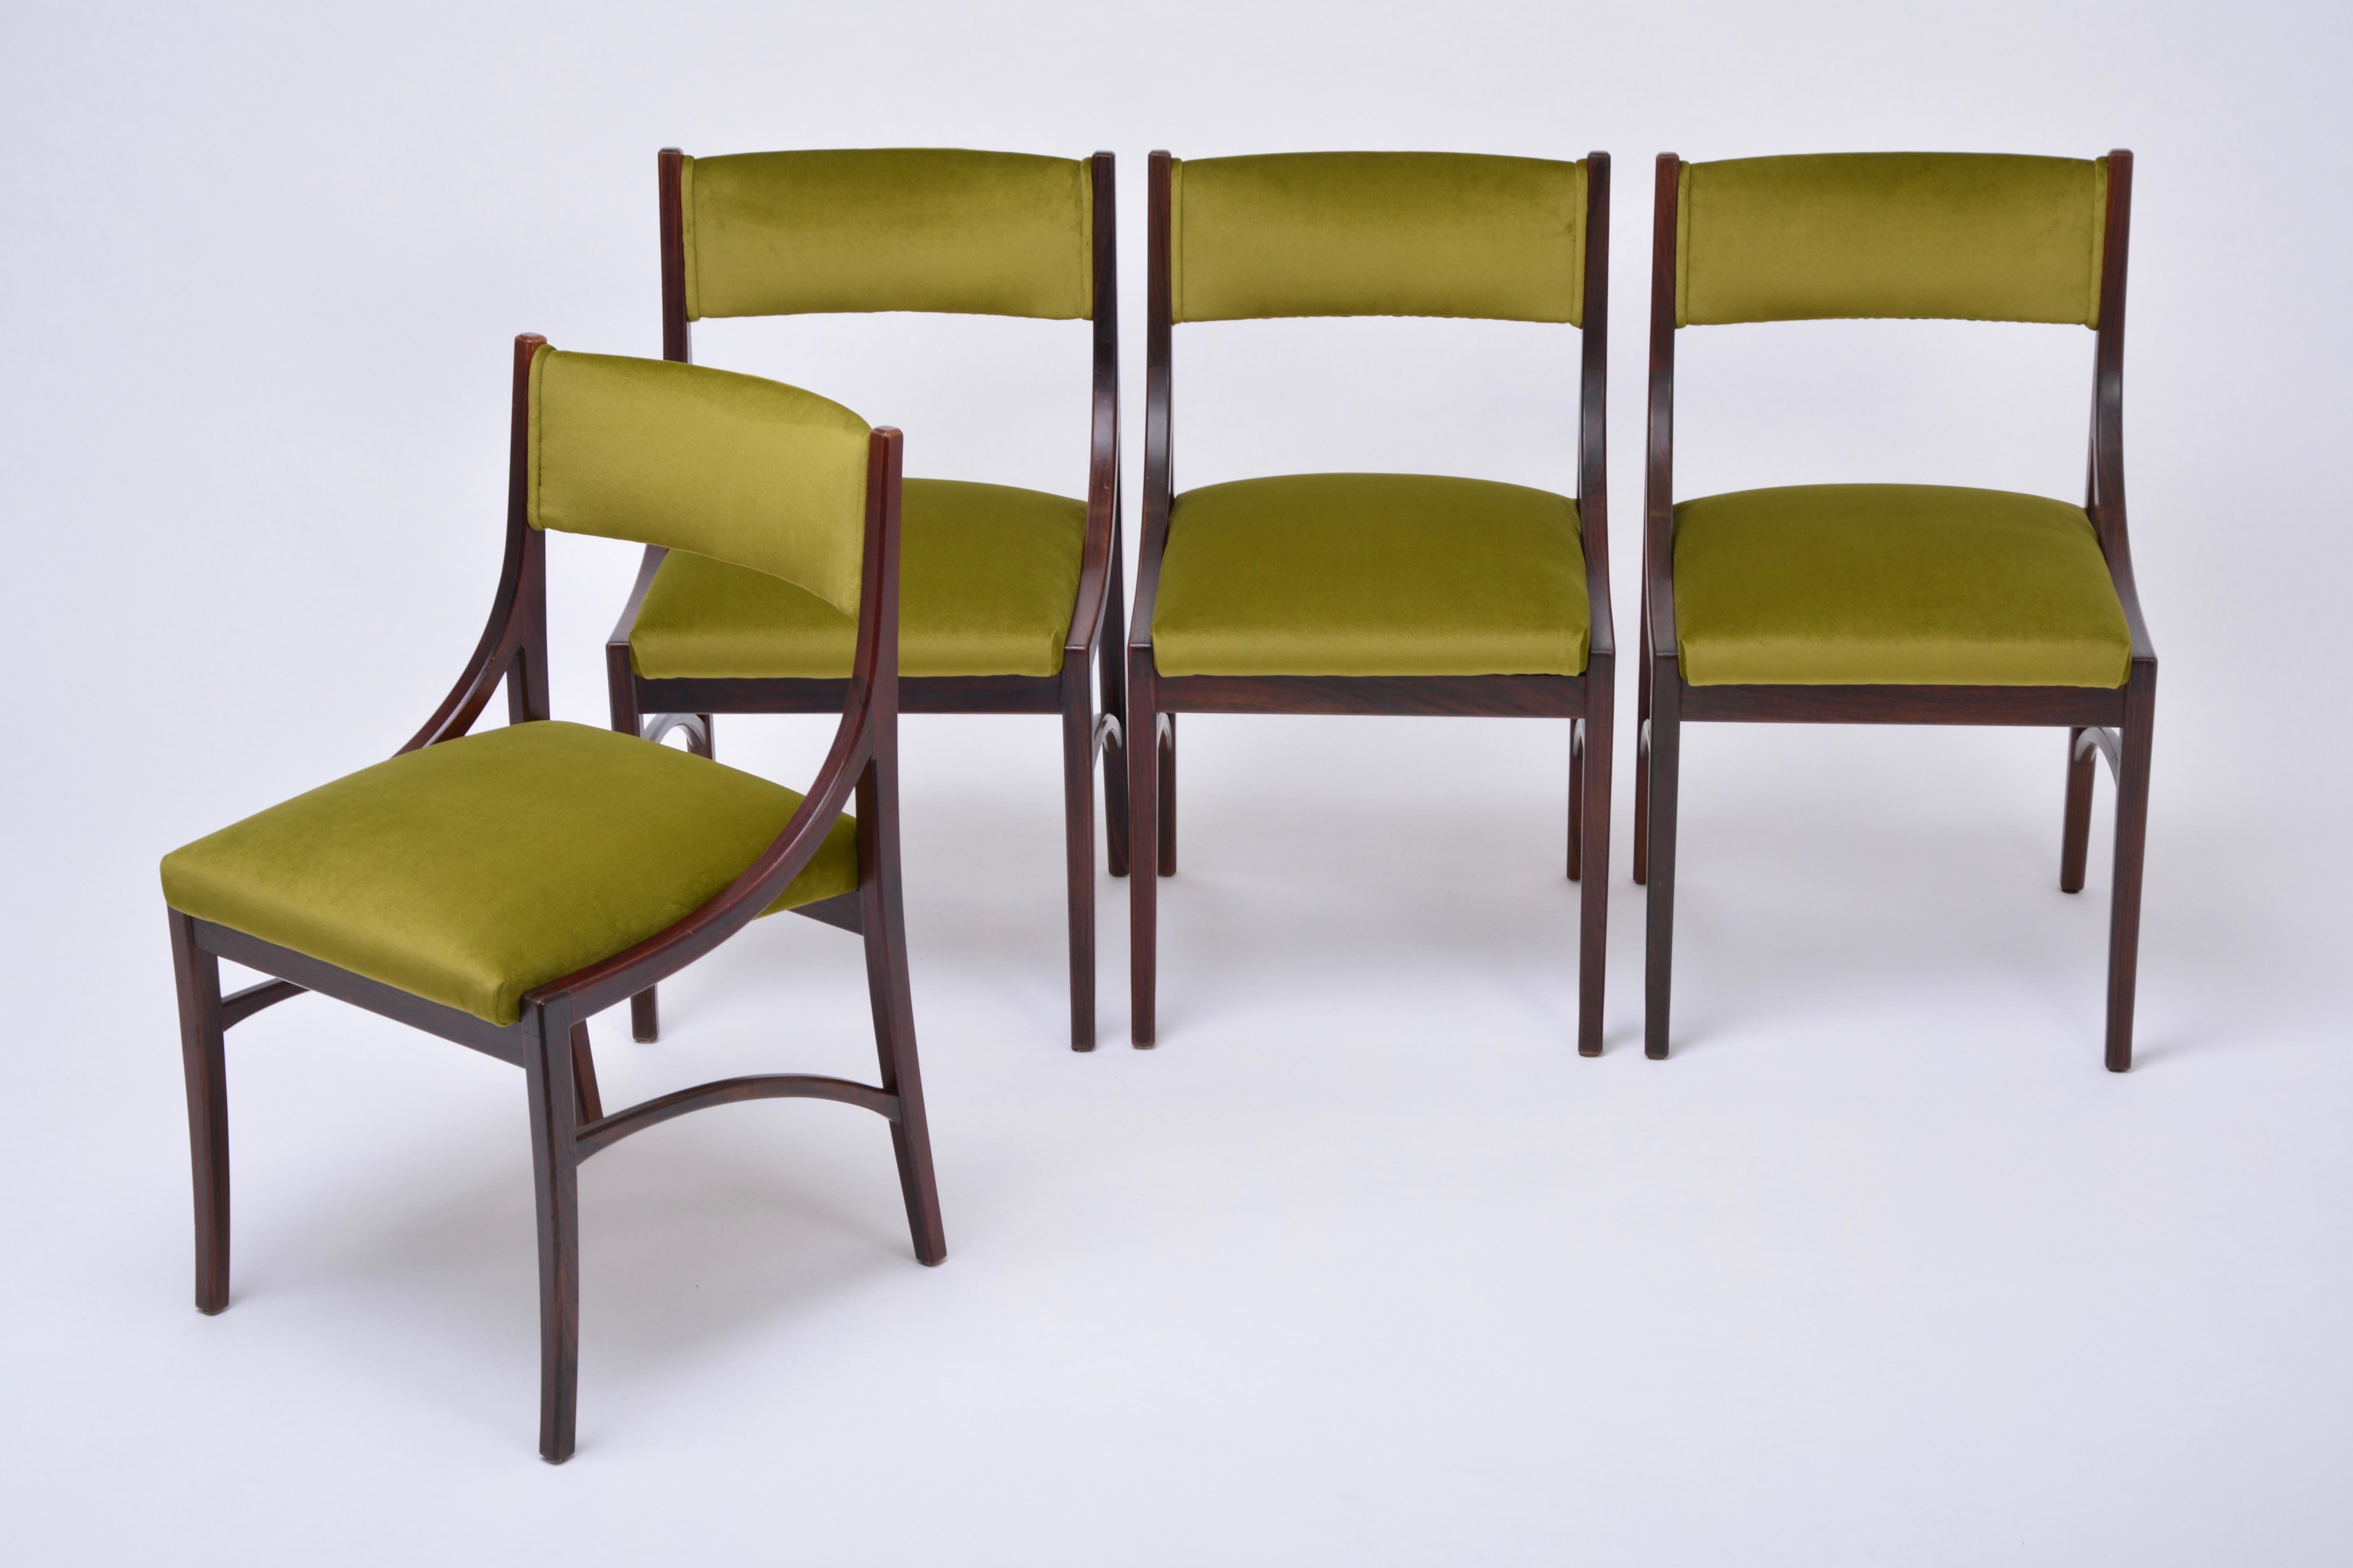 Set of four Mid-Century Modern Green reupholstered Dining Chairs by Ico Parisi
Ico Parisi designed the model 110 chair in 1960 for Cassina. The chairs offered here are a version with padded backrest of this model. The frames are made of